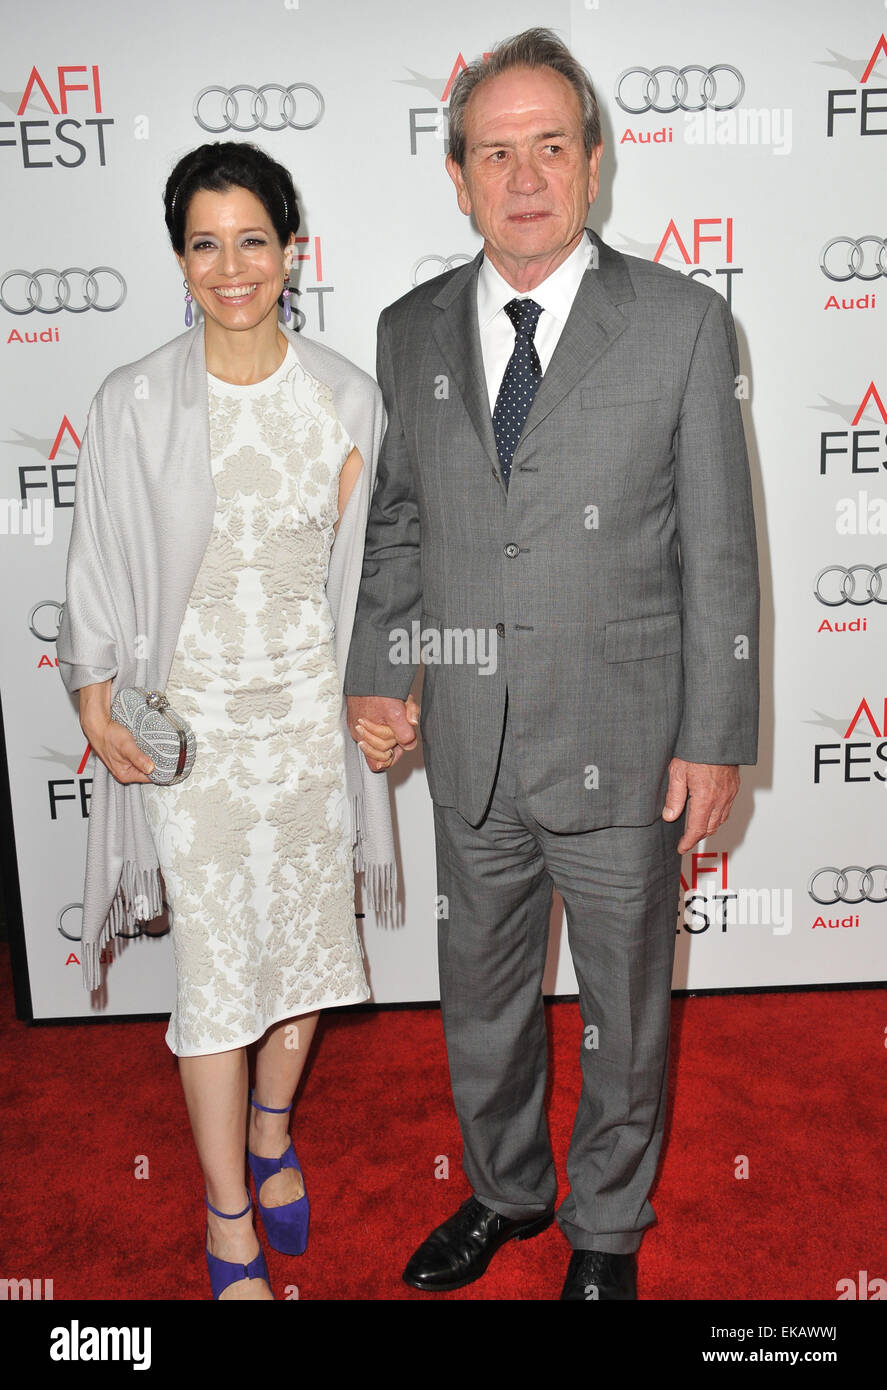 LOS ANGELES, CA - NOVEMBER 8, 2012: Tommy Lee Jones & wife Dawn Jones at the AFI Fest premiere of his movie 'Lincoln' at Grauman's Chinese Theatre, Hollywood. Stock Photo